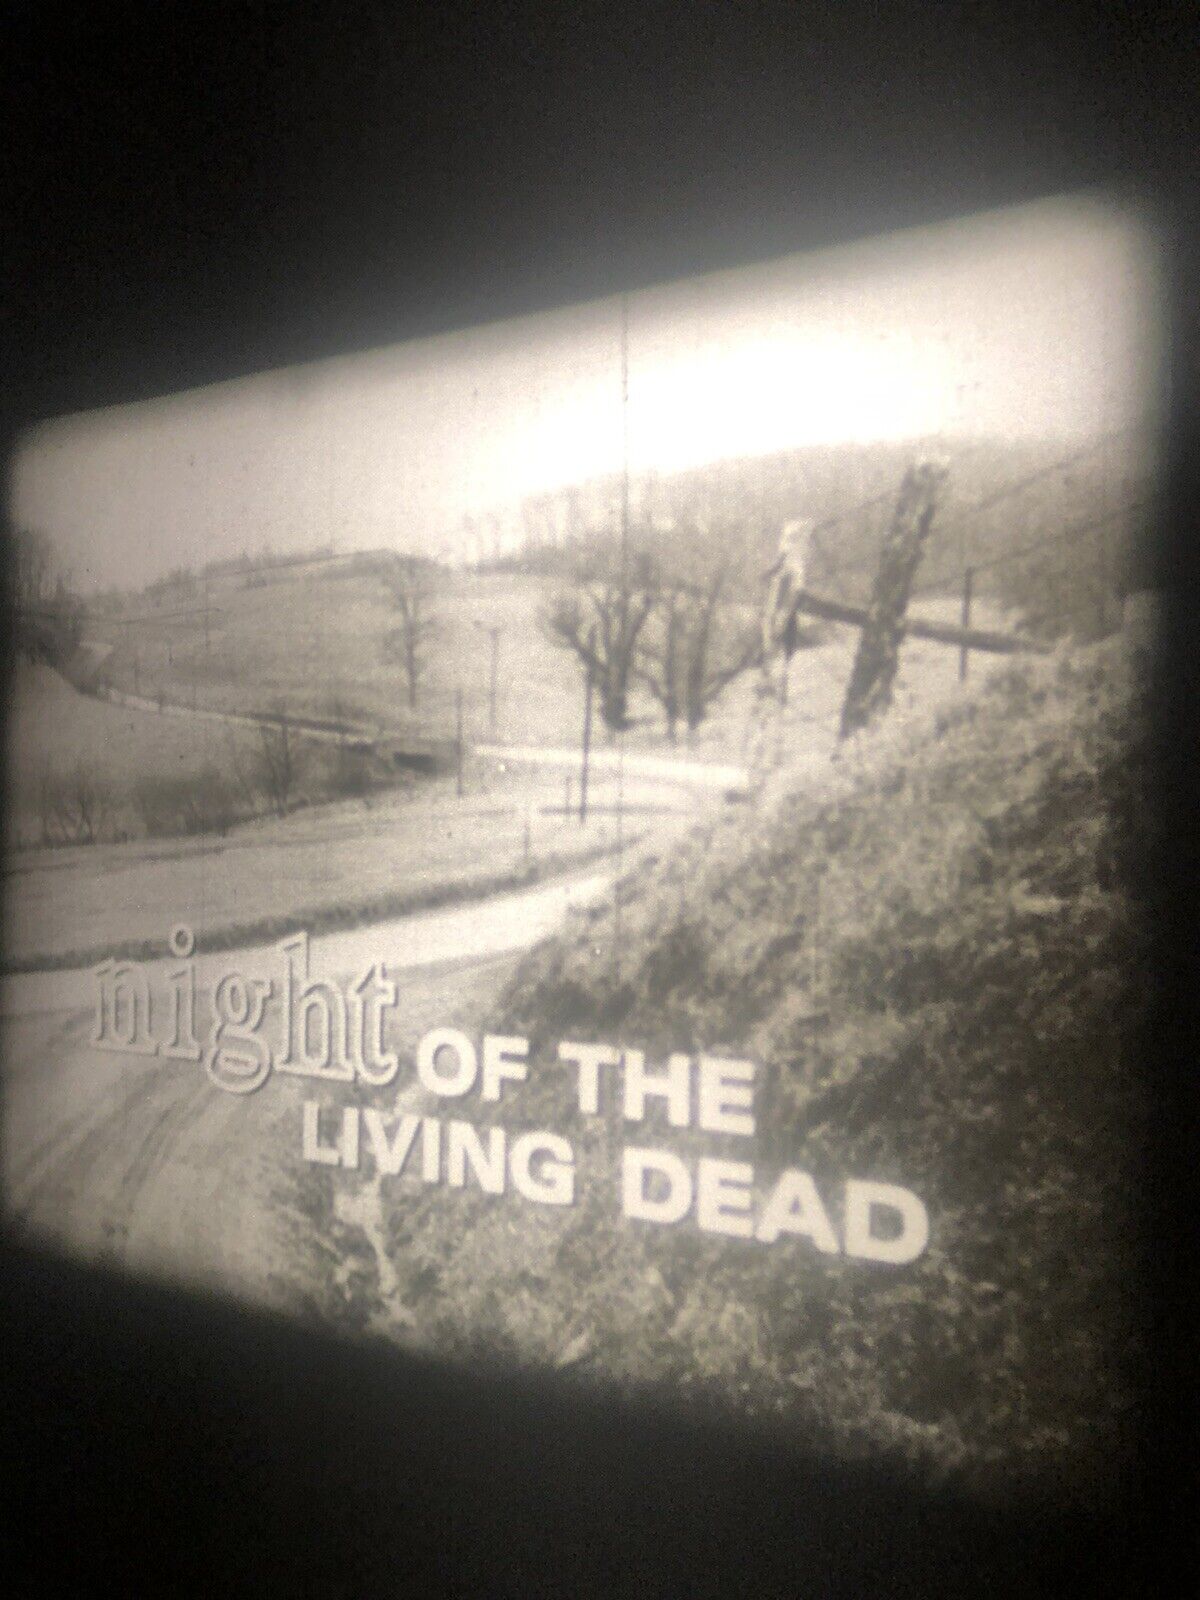 16mm ‘NIGHT OF THE LIVING DEAD’ feature film horror 1968.